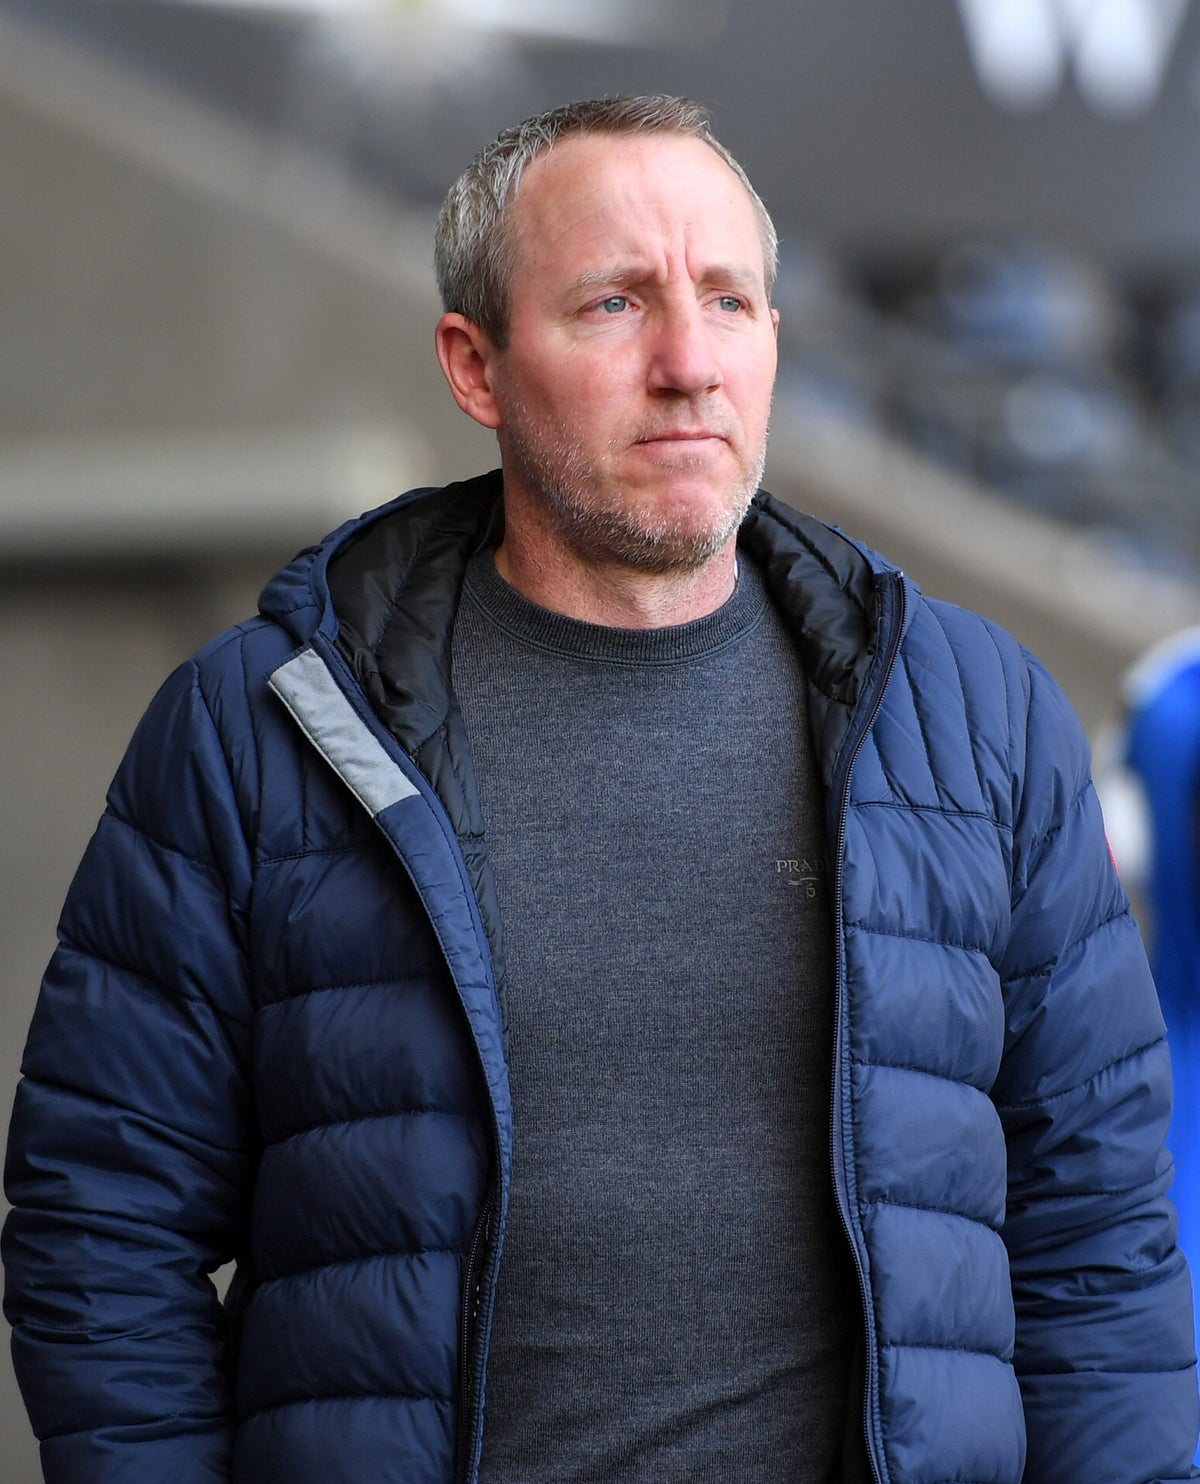 Lee Bowyer sacked by Birmingham amid takeover uncertainty